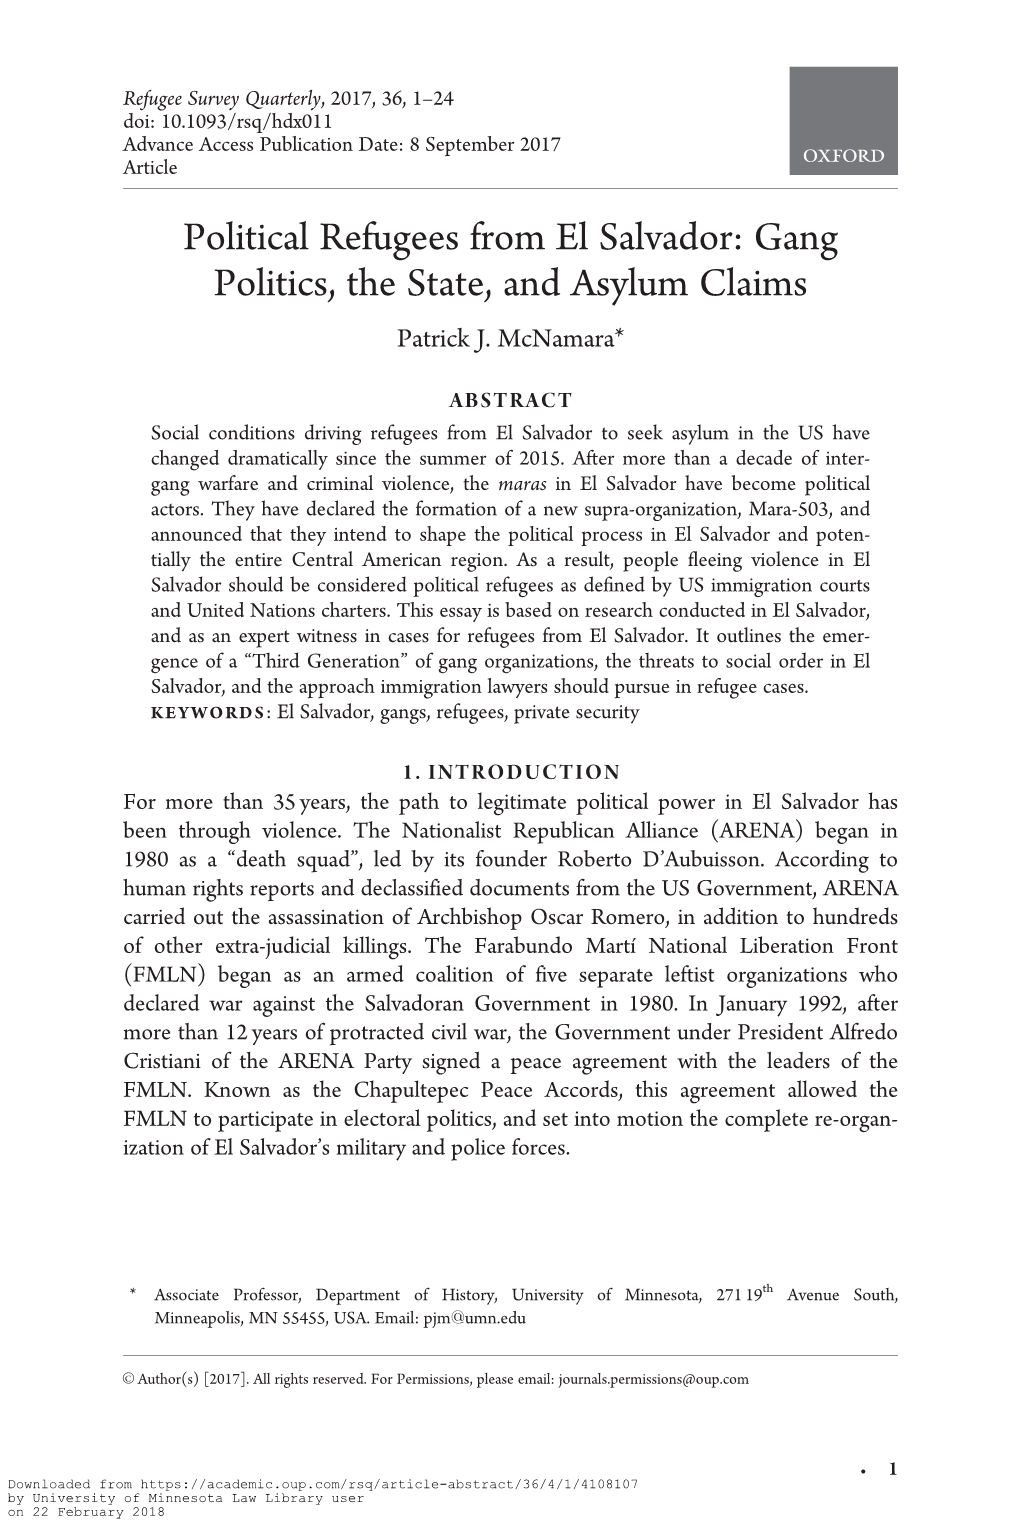 Political Refugees from El Salvador: Gang Politics, the State, and Asylum Claims Patrick J